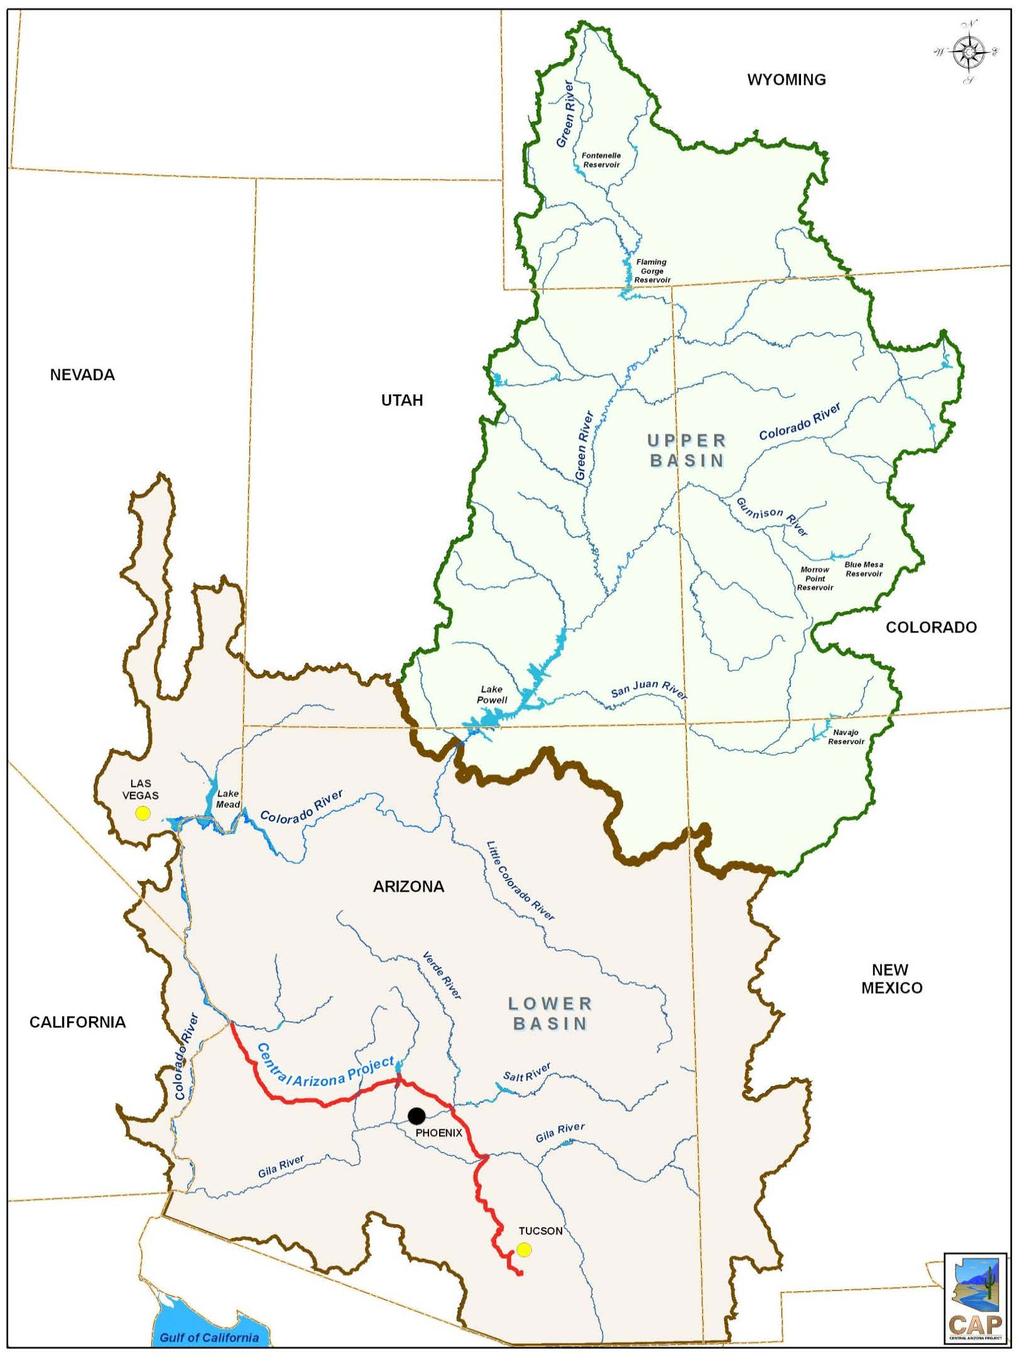 Colorado River Water Supply Report Total System Contents: 27.